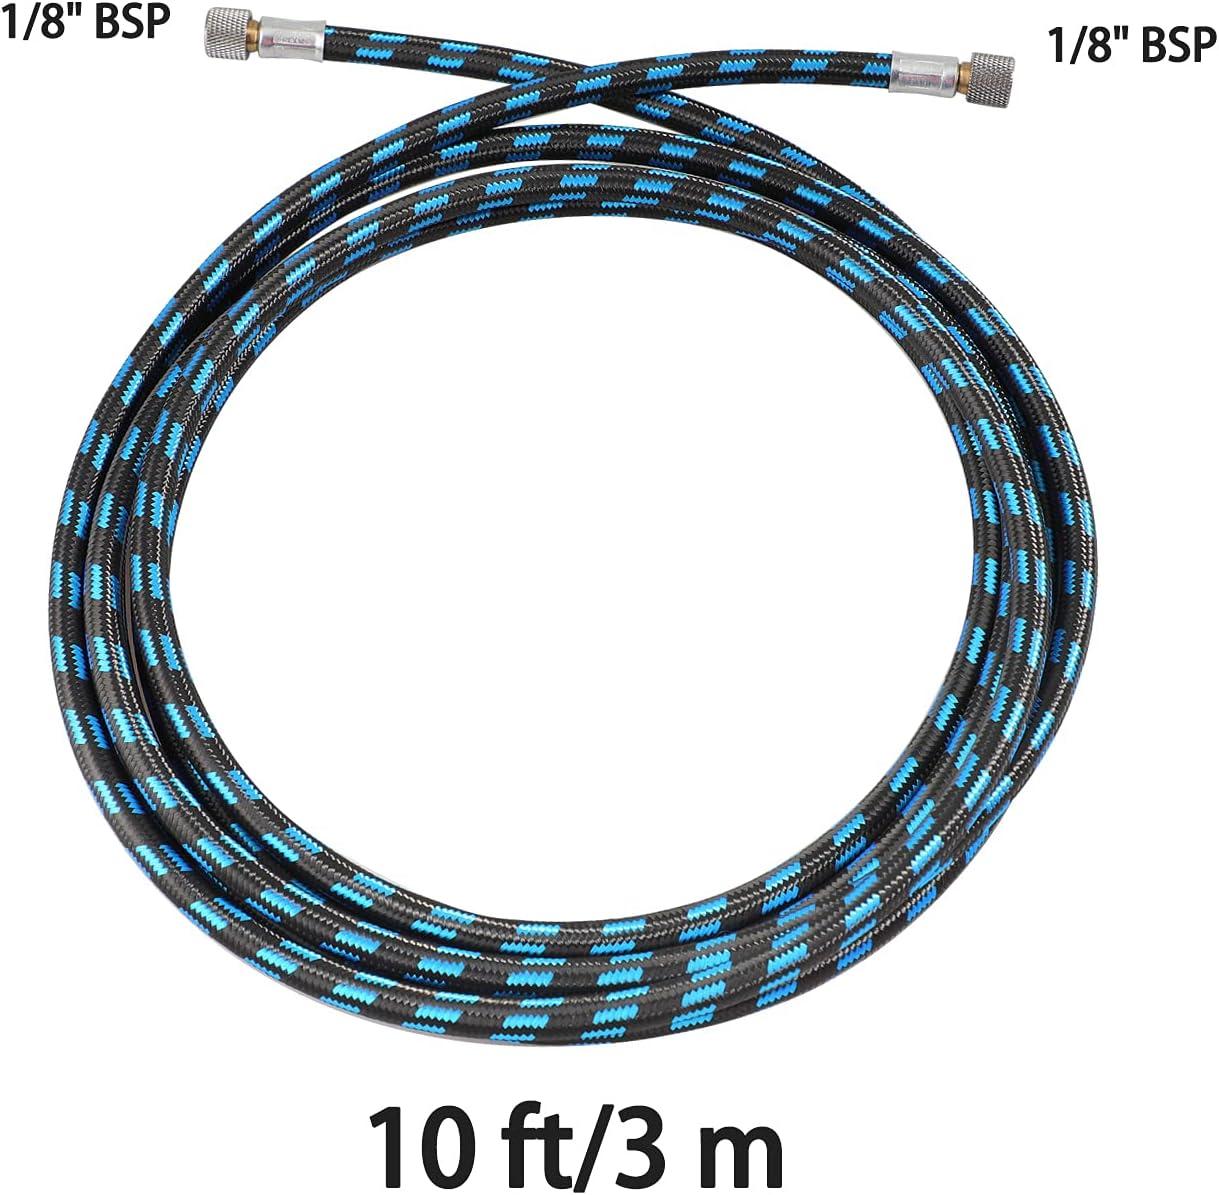 Master Airbrush Premium 10 Foot Nylon Braided Airbrush Hose with Standard 1/8 Size Fittings on Both Ends (Hose Color May Vary)